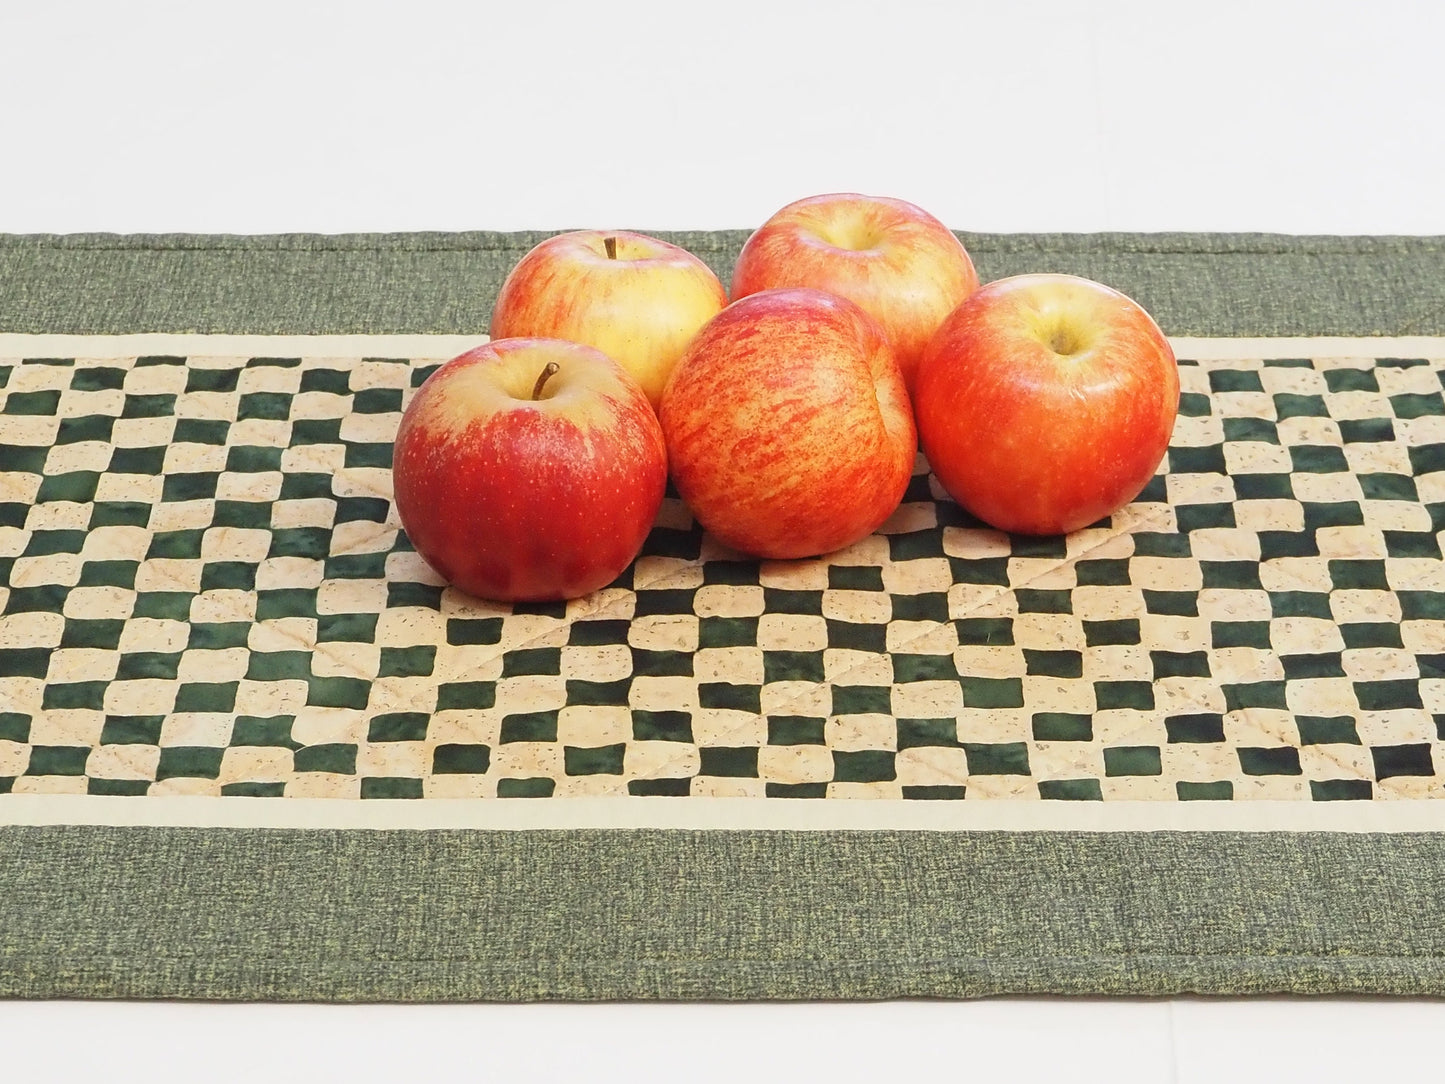 Green Check Quilted Table Runner